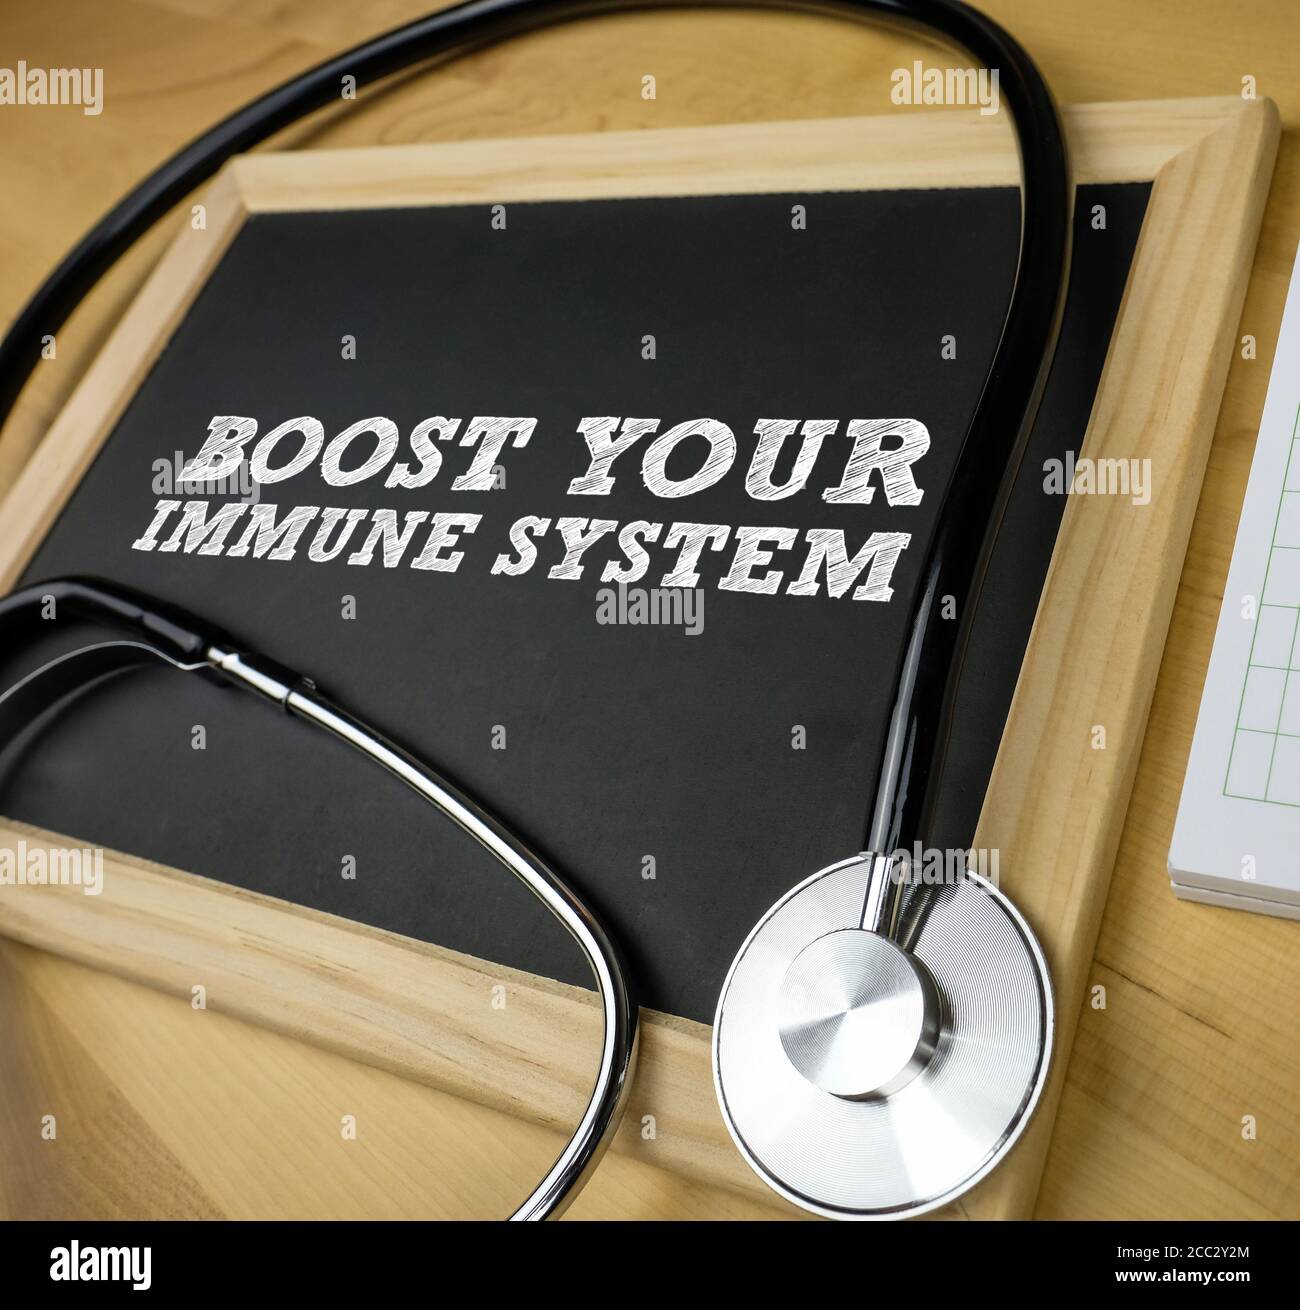 Boost your immune system - chalkboard concept Stock Photo